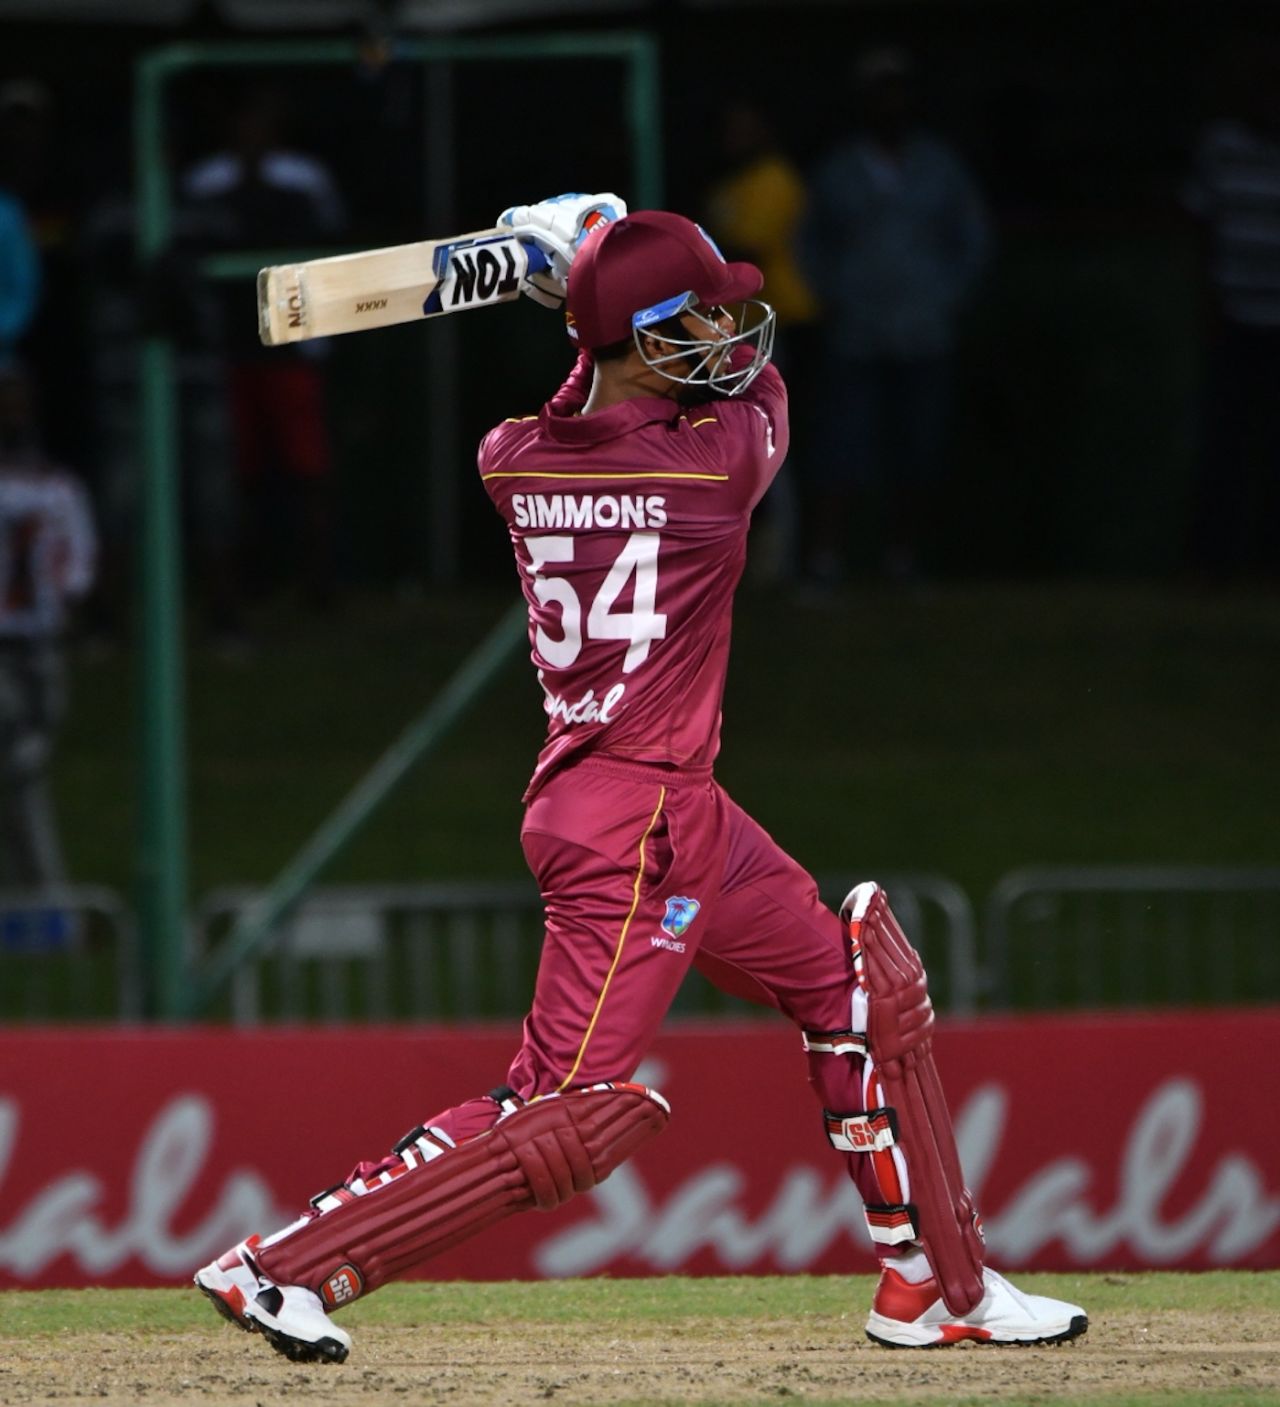 Lendl Simmons carts one down the ground, West Indies v Ireland, 3rd T20I, St Kitts, January 19, 2020